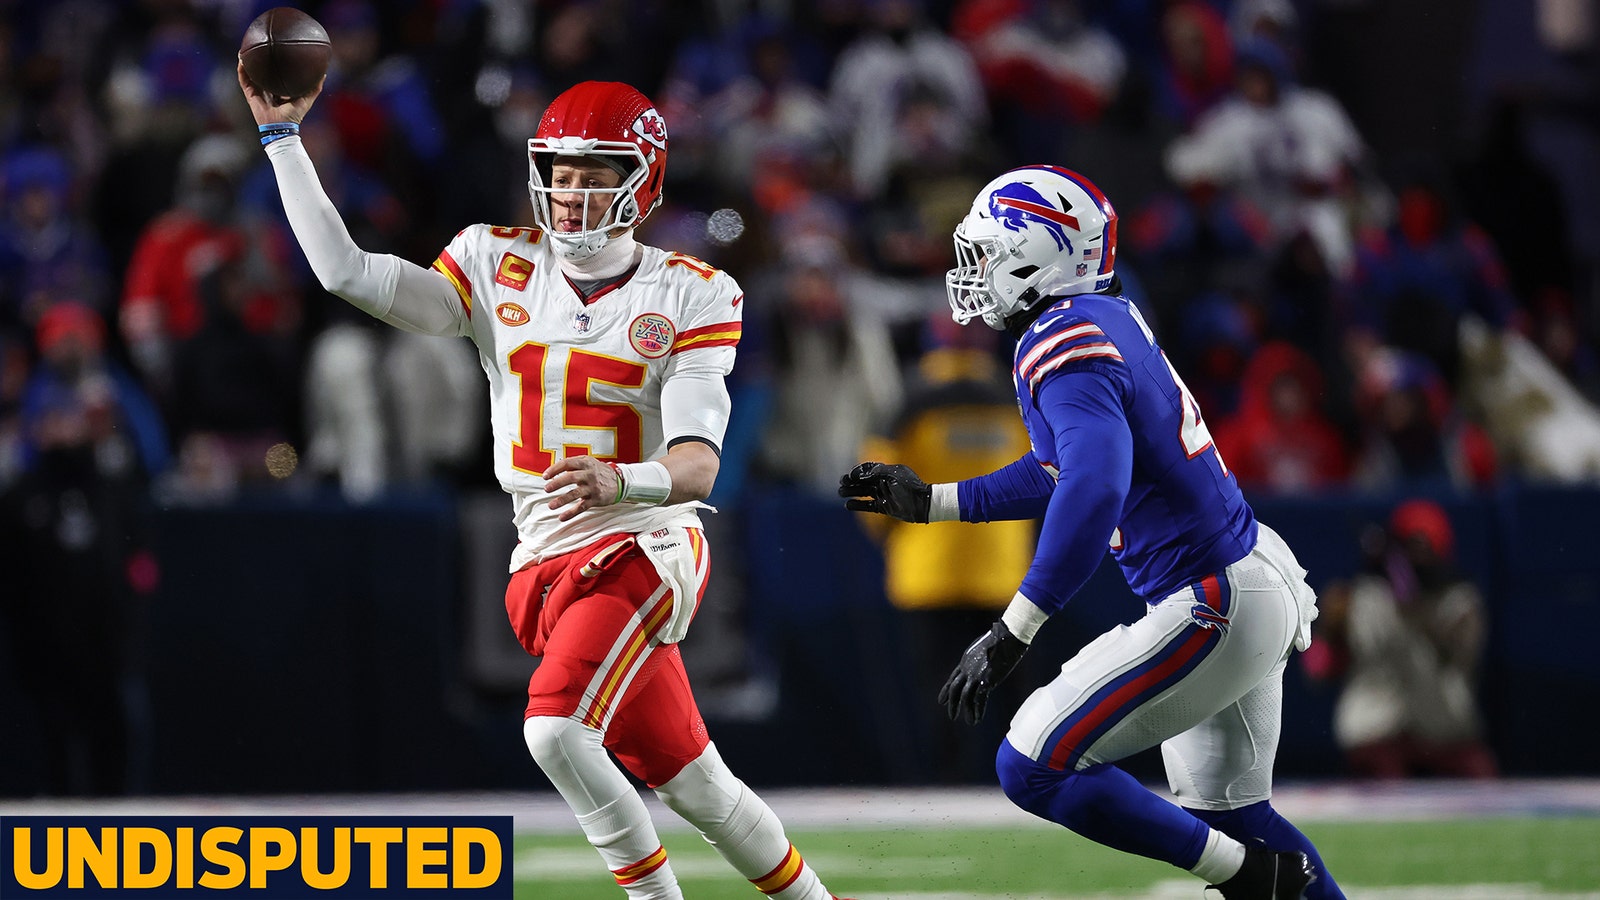 Mahomes bests Allen in first road playoff game 